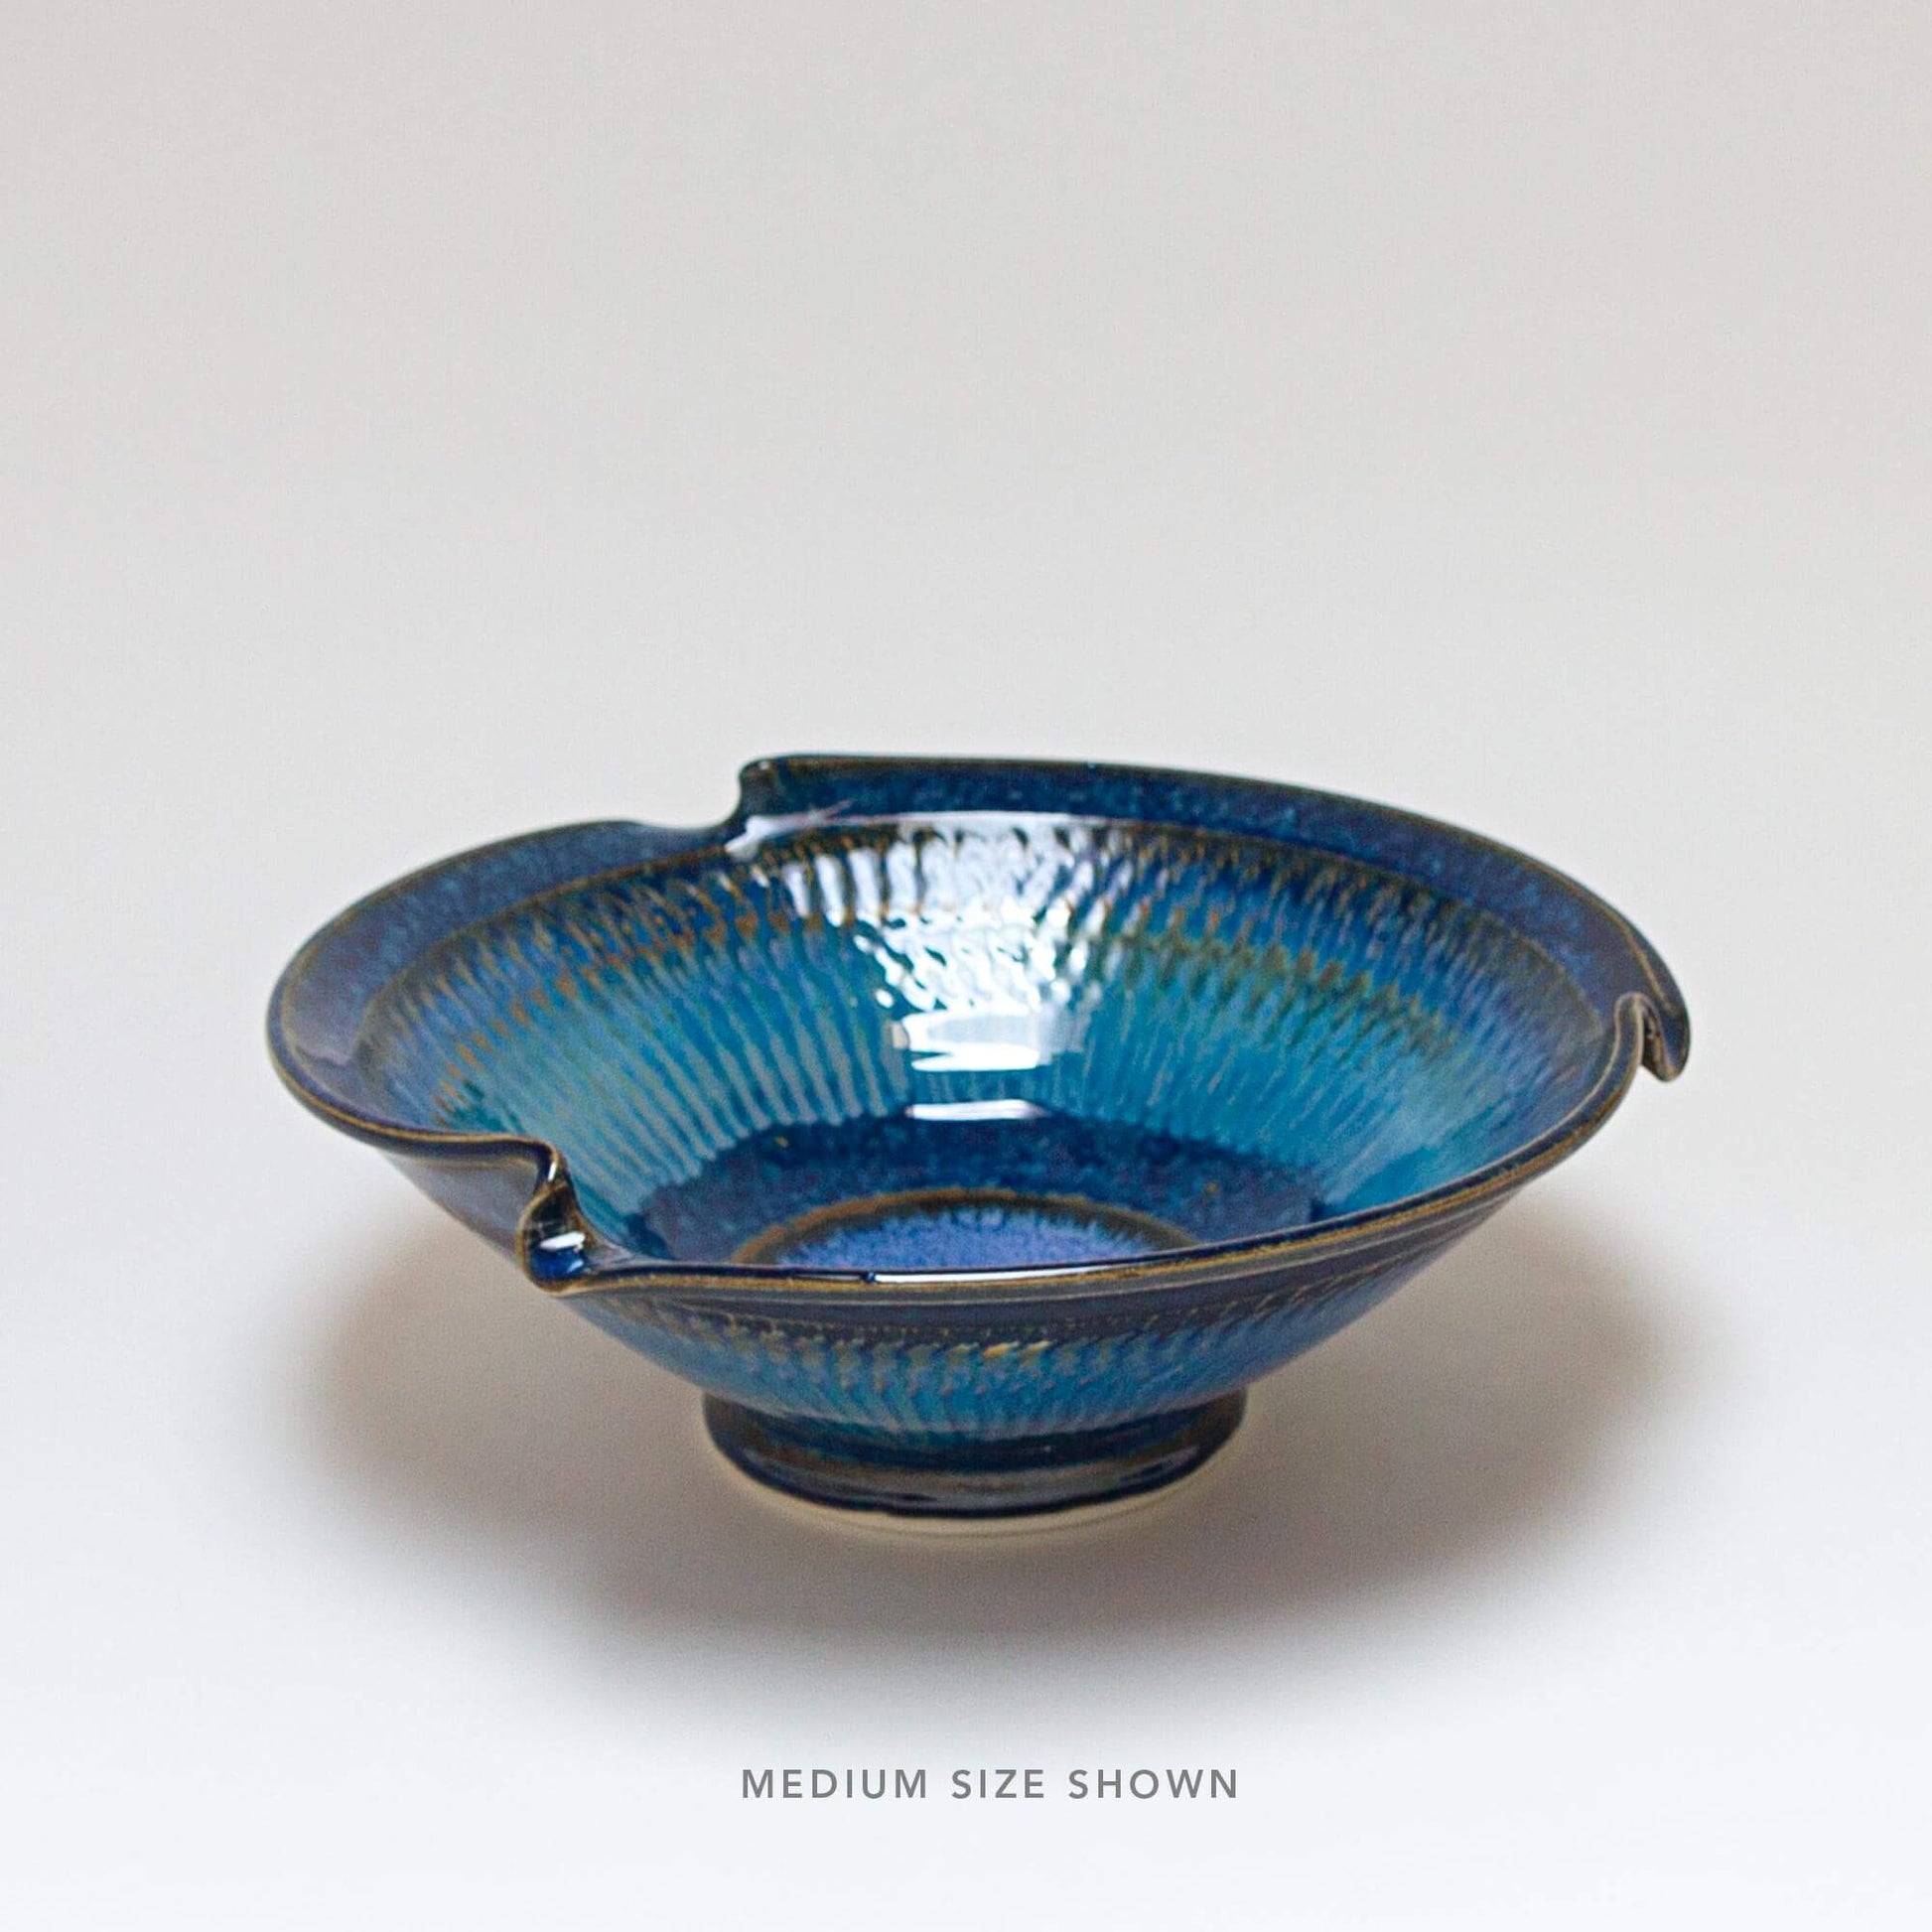 Handmade Pottery Signature Wave Bowl in Cobalt pattern made by Georgetown Pottery in Maine